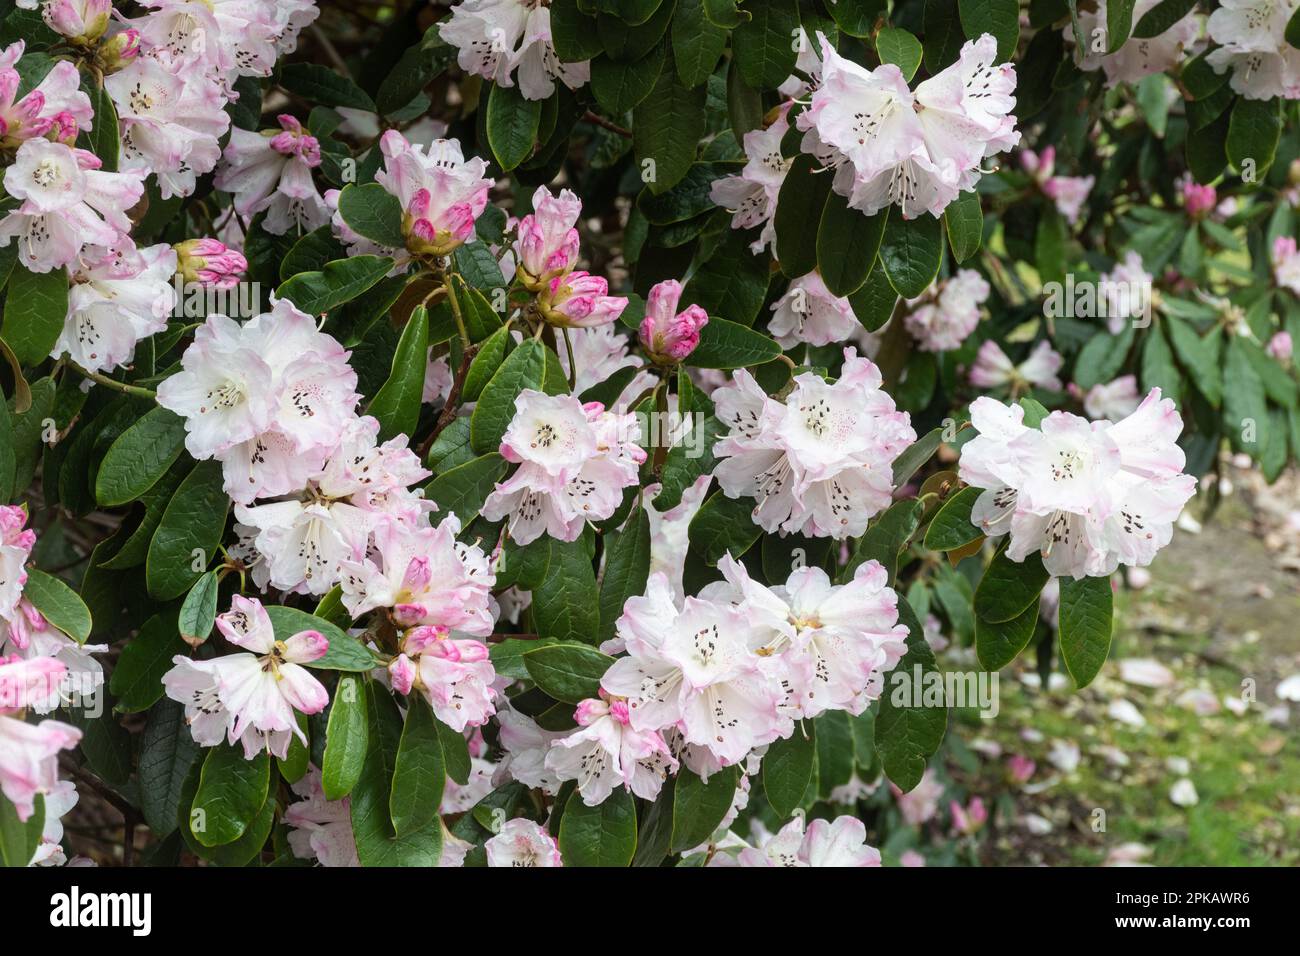 Pink and white spotted flowers or blooms of Rhododendron coeloneuron ssp. coeloneuron (Subsection taliensia) flowering in Spring, UK Stock Photo